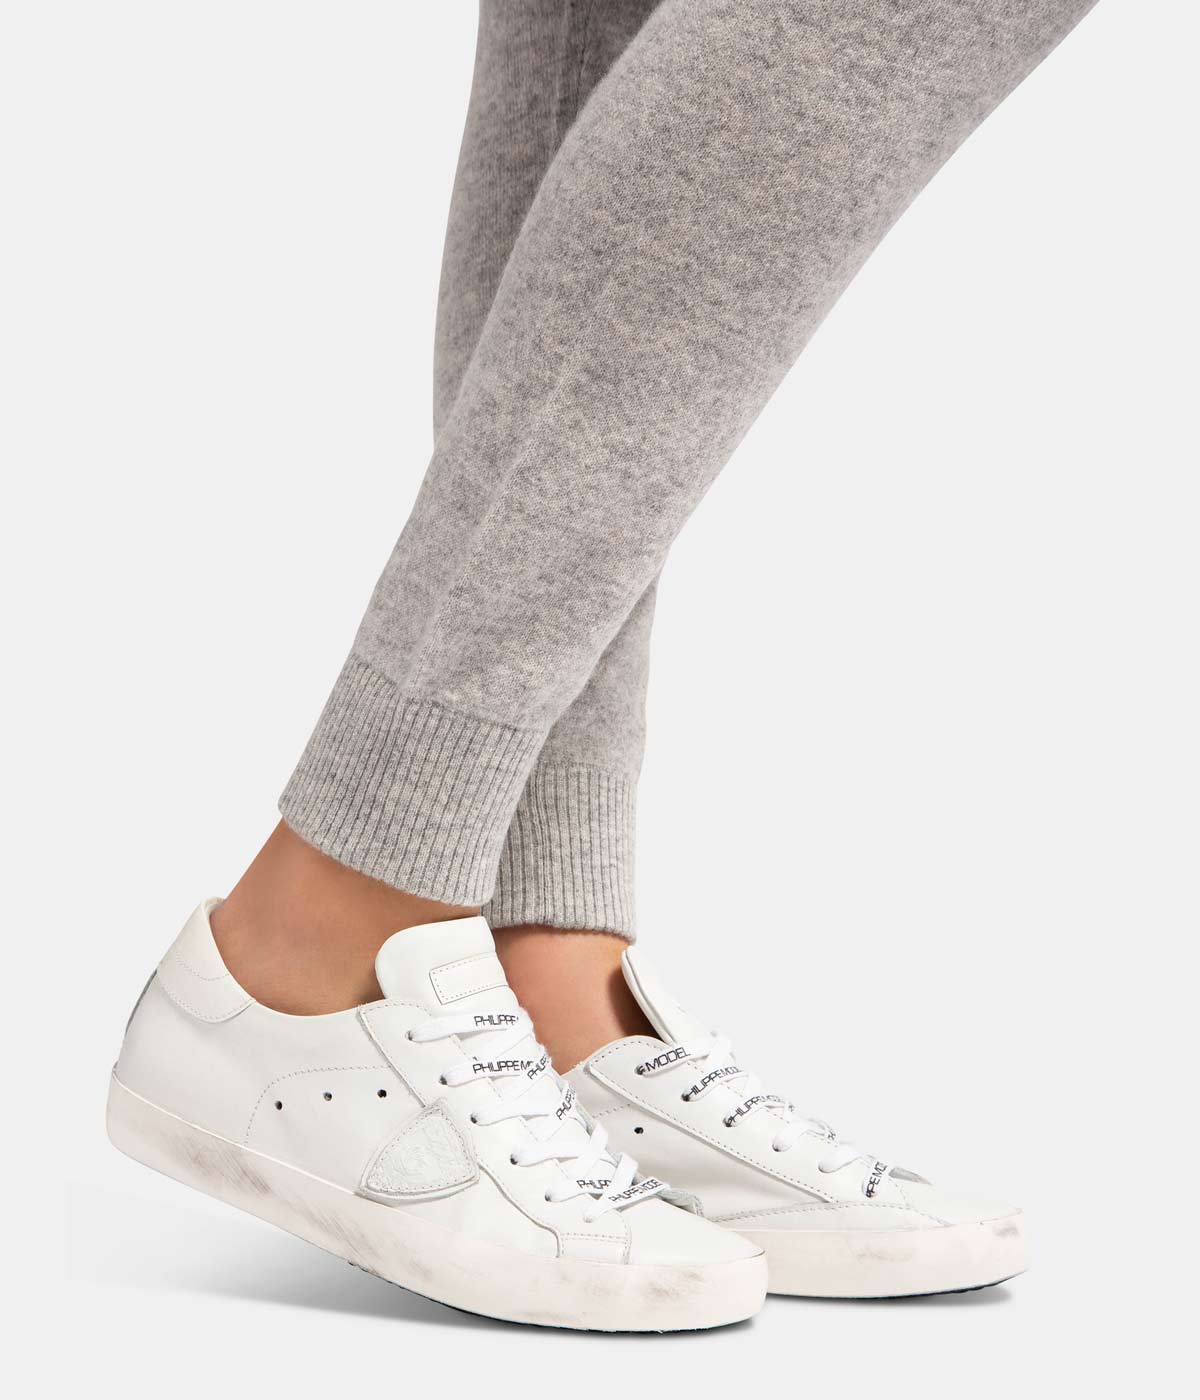 Cashmere Jogger Track Pants in Grey